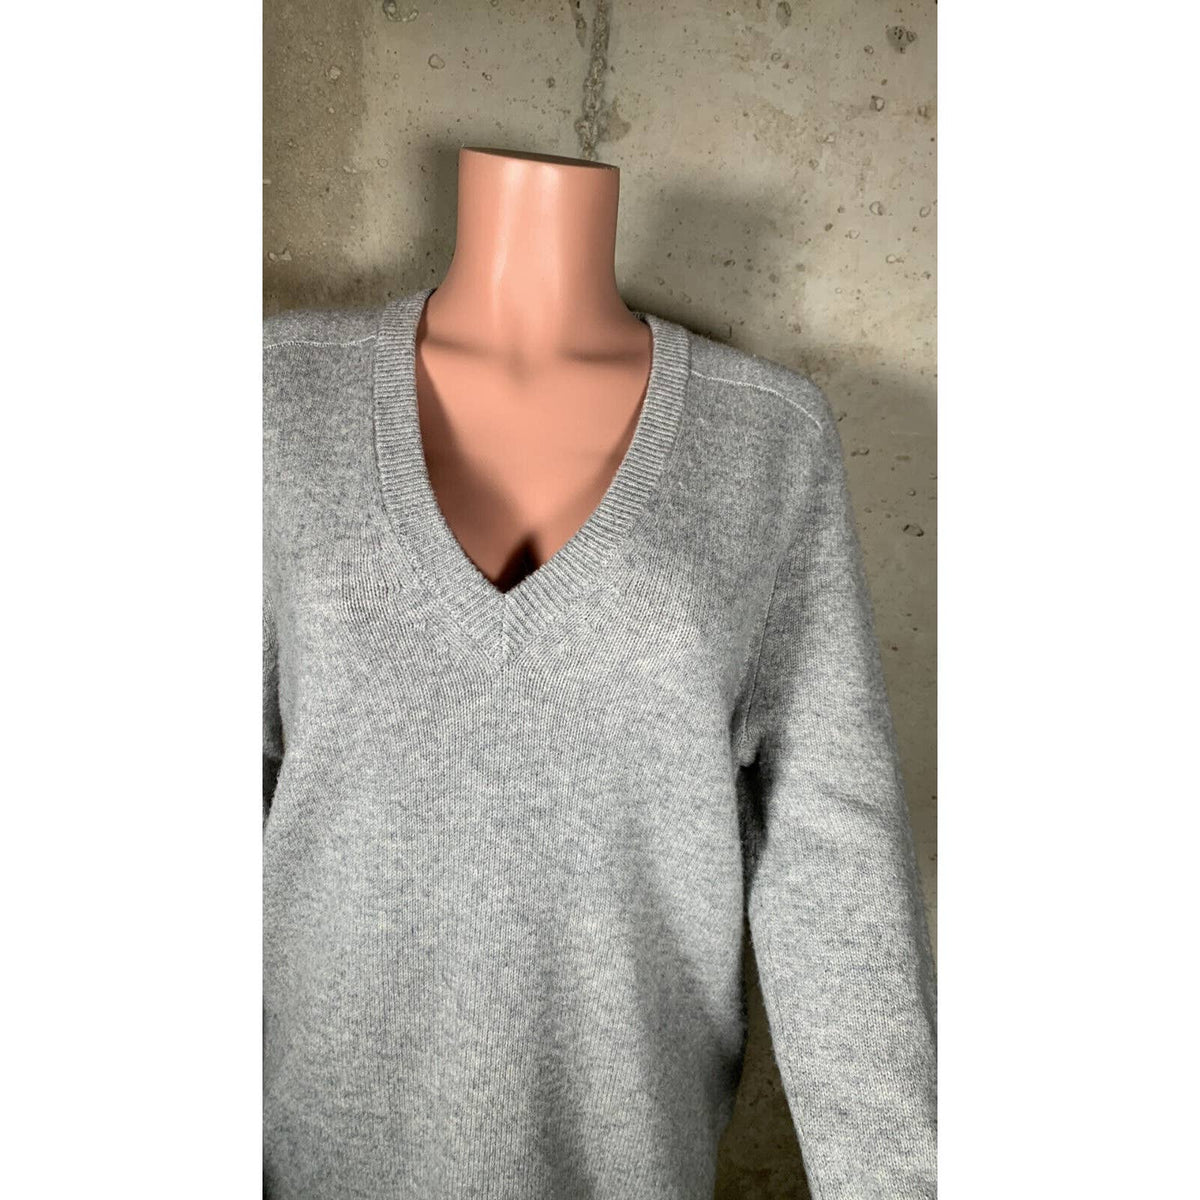 Vince V-Neck Grey Cashmere and Wool Sweater Sz. Medium